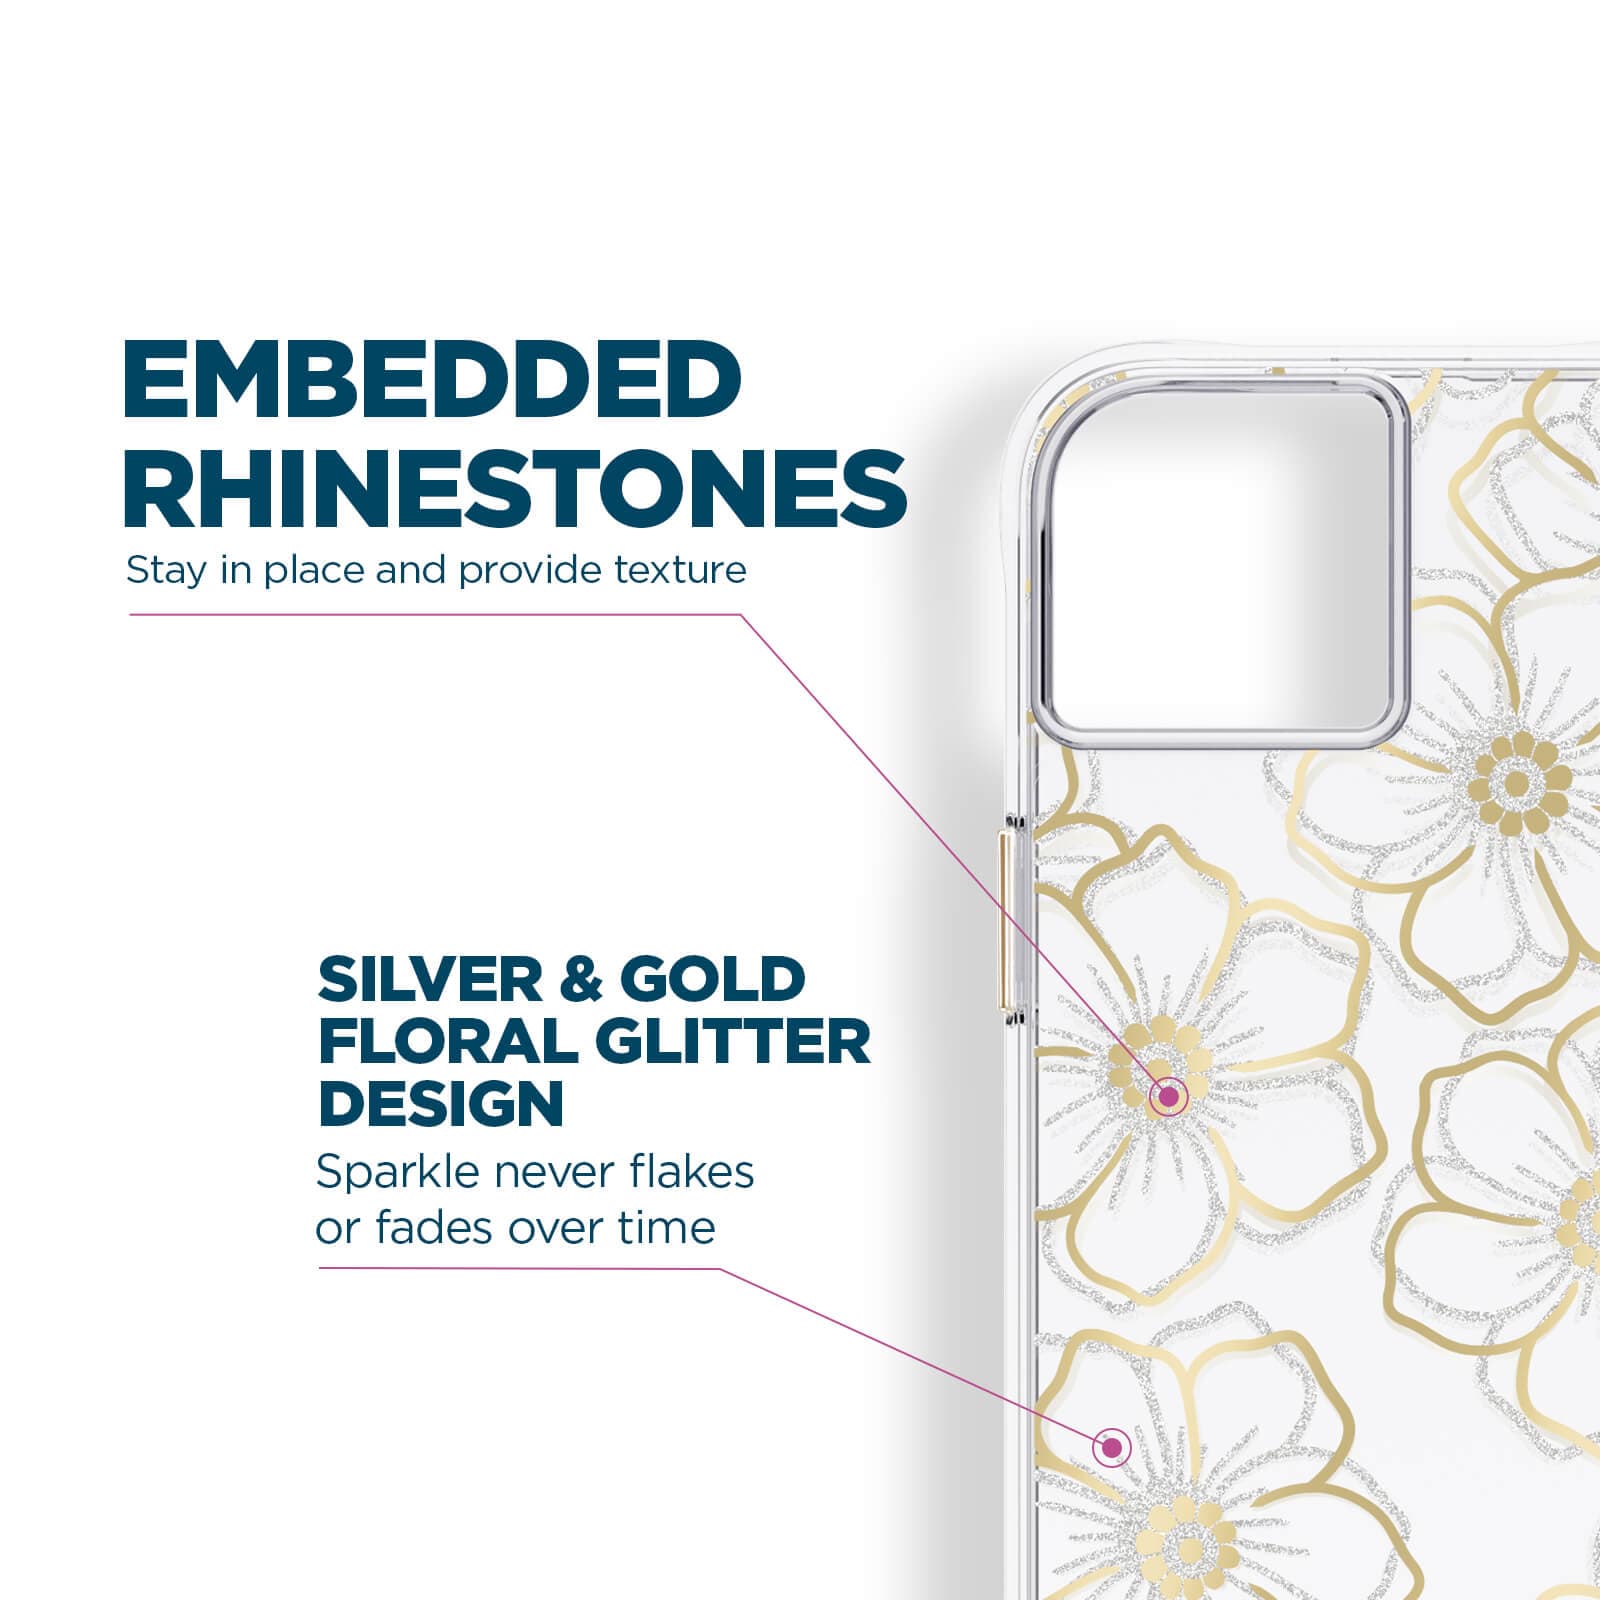 Embedded rhinestones stay in place and provide texture. Silver & Gold Floral Glitter Design. Sparkle never flakes or fades over time. color::Floral Gems